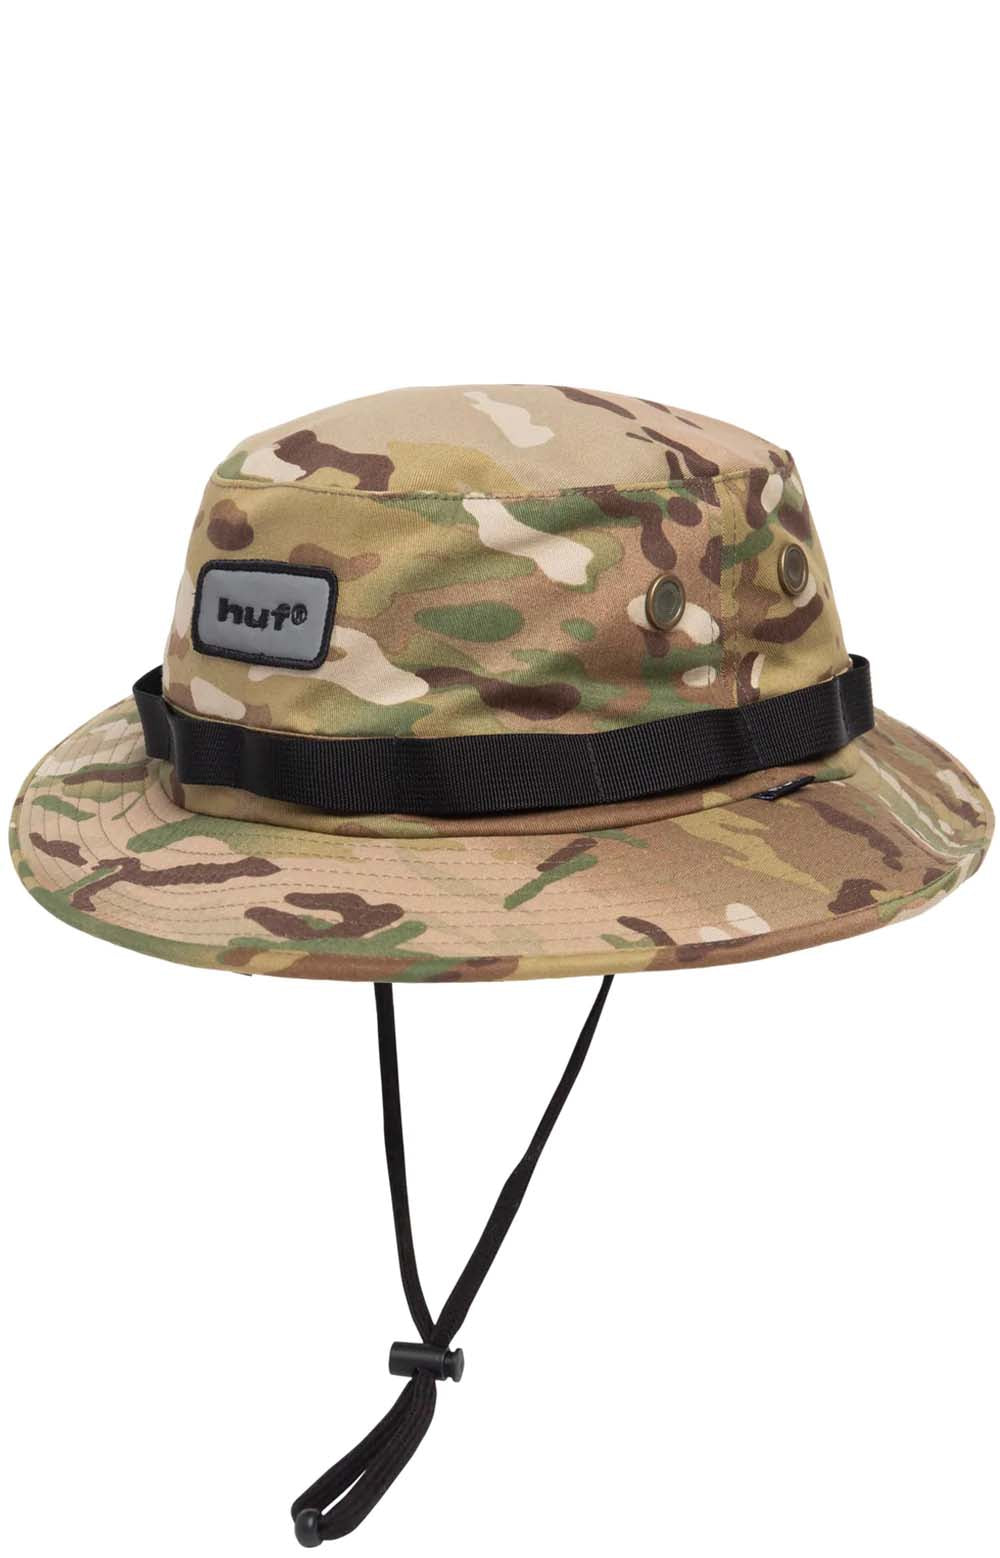 Wild Out Camo Boonie Hat - Camo